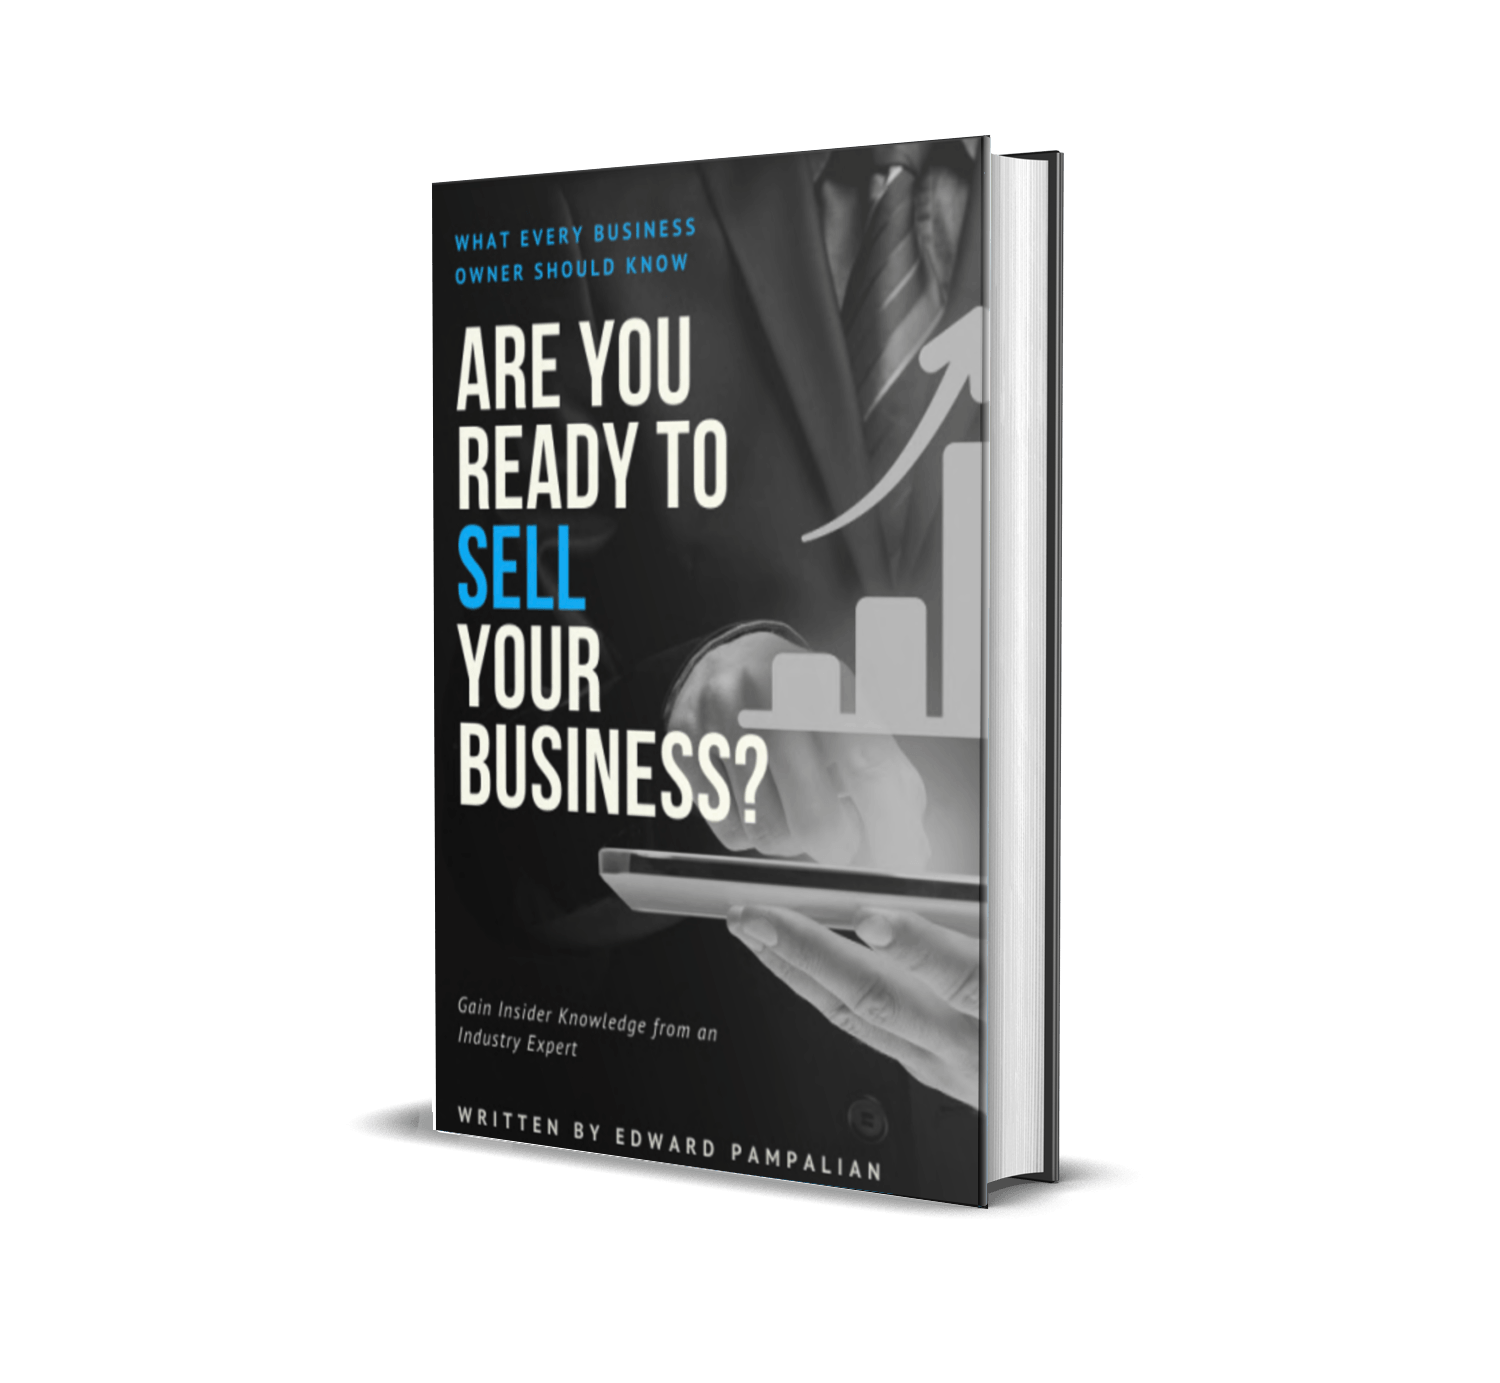 Are You Ready to Sell Your Business? eBook by Edward Pampalian